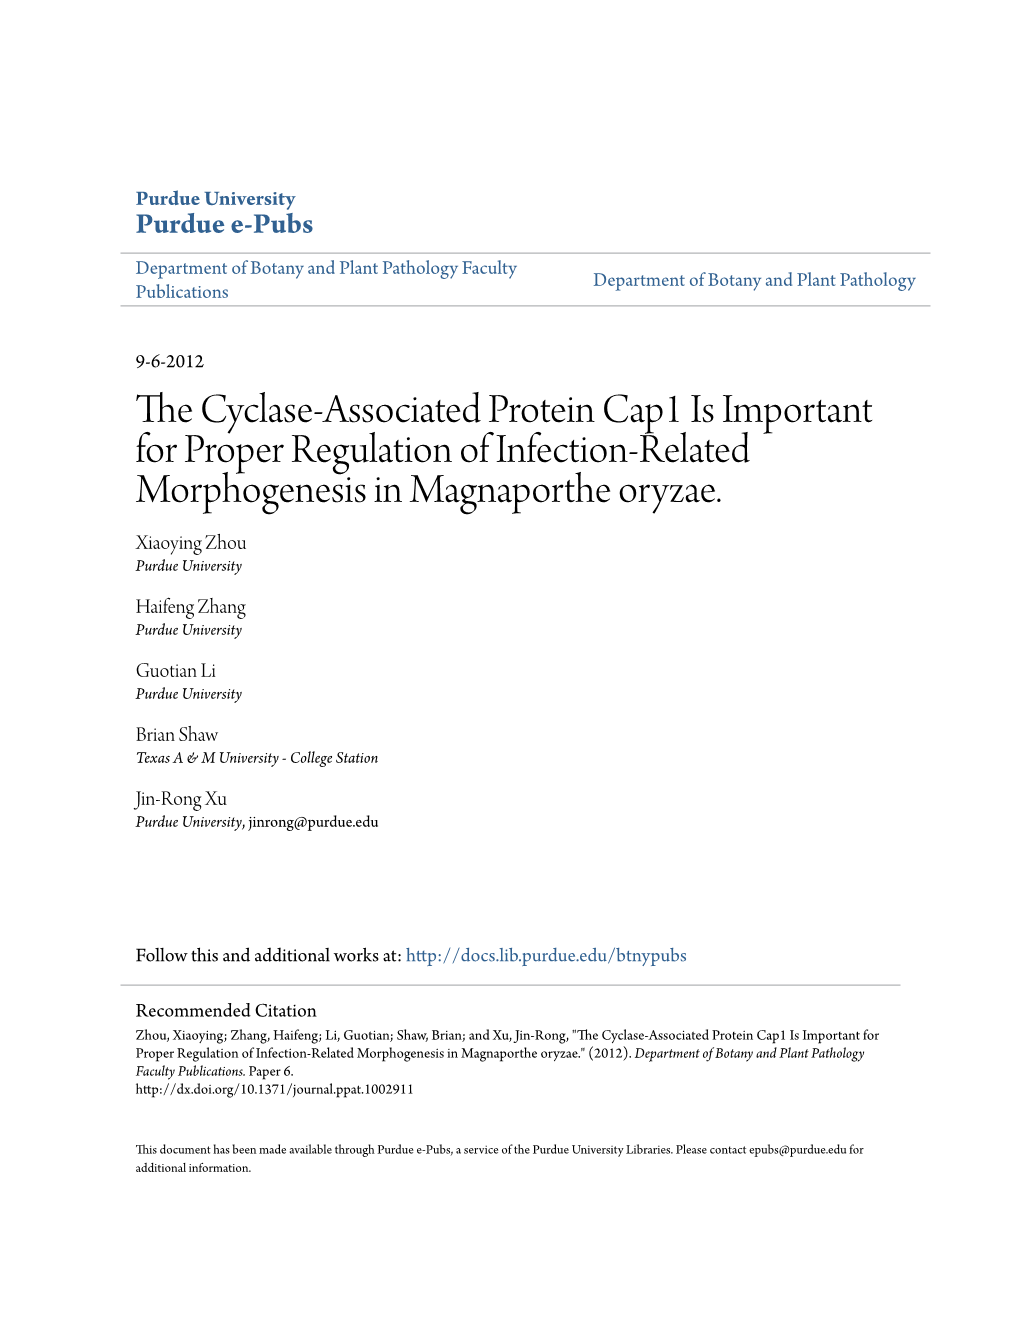 The Cyclase-Associated Protein Cap1 Is Important for Proper Regulation of Infection-Related Morphogenesis in Magnaporthe Oryzae. Plos Pathog 8(9): E1002911